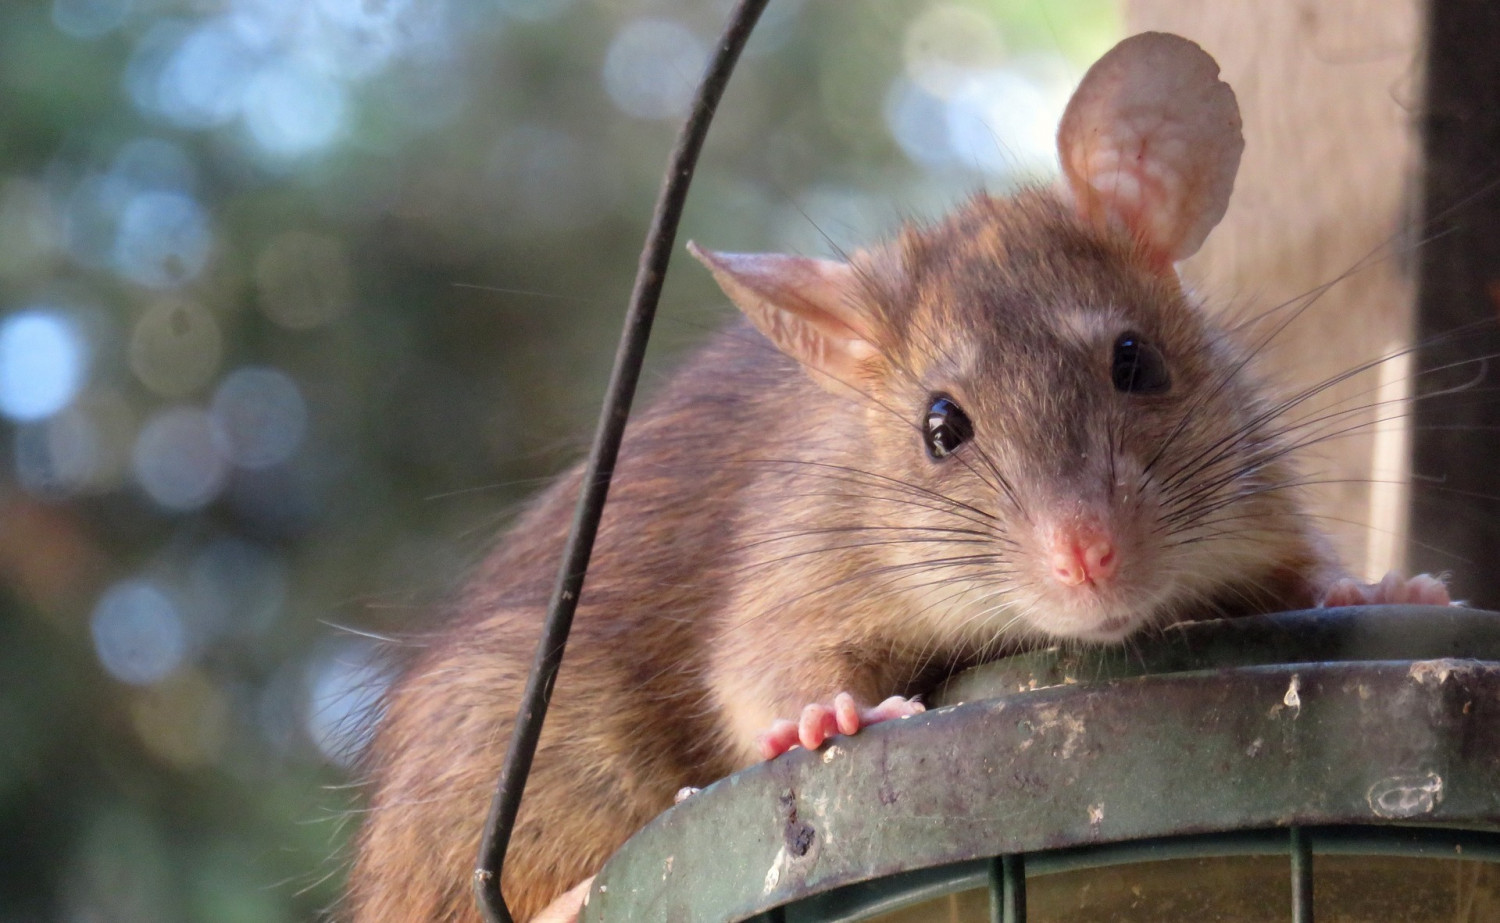 Infestation of Massive ‘Cat-Sized’ Rats in New Zealand Worries Locals